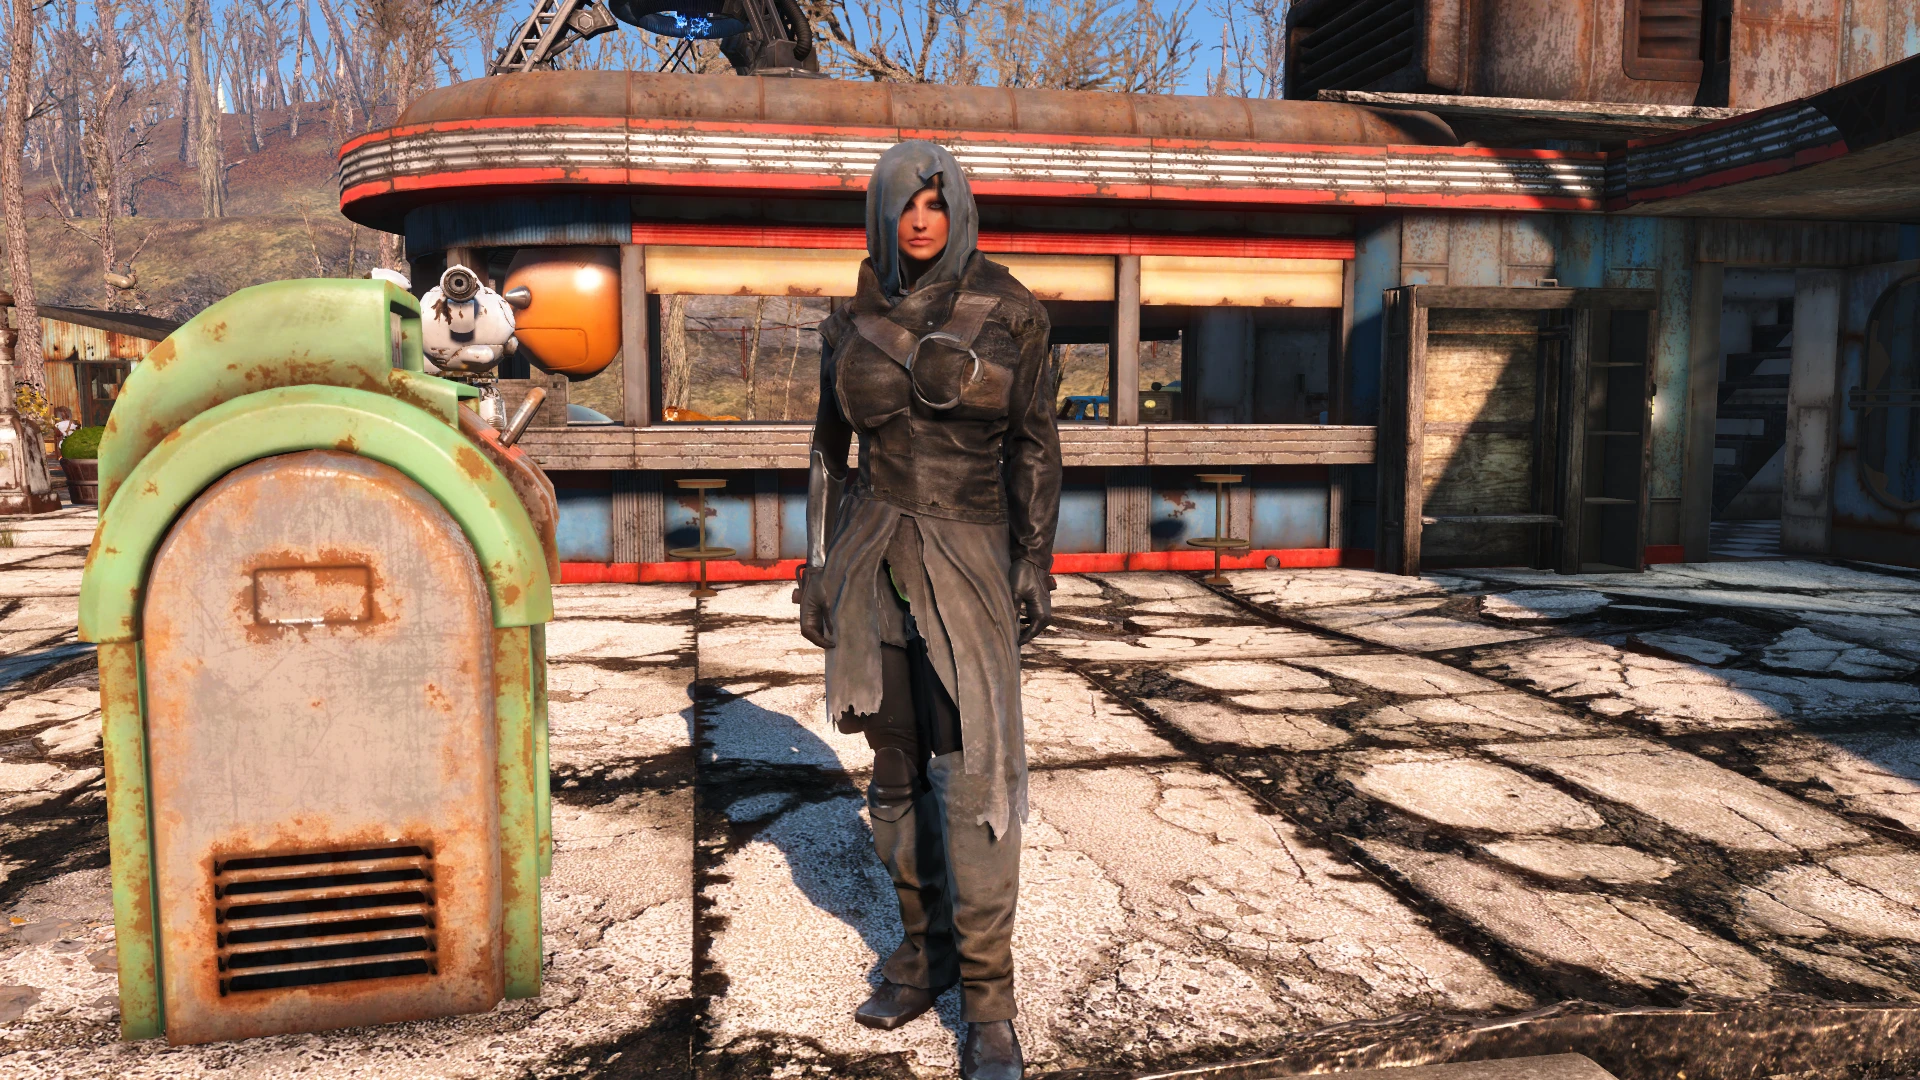 chinese stealth suit fallout 4 mod